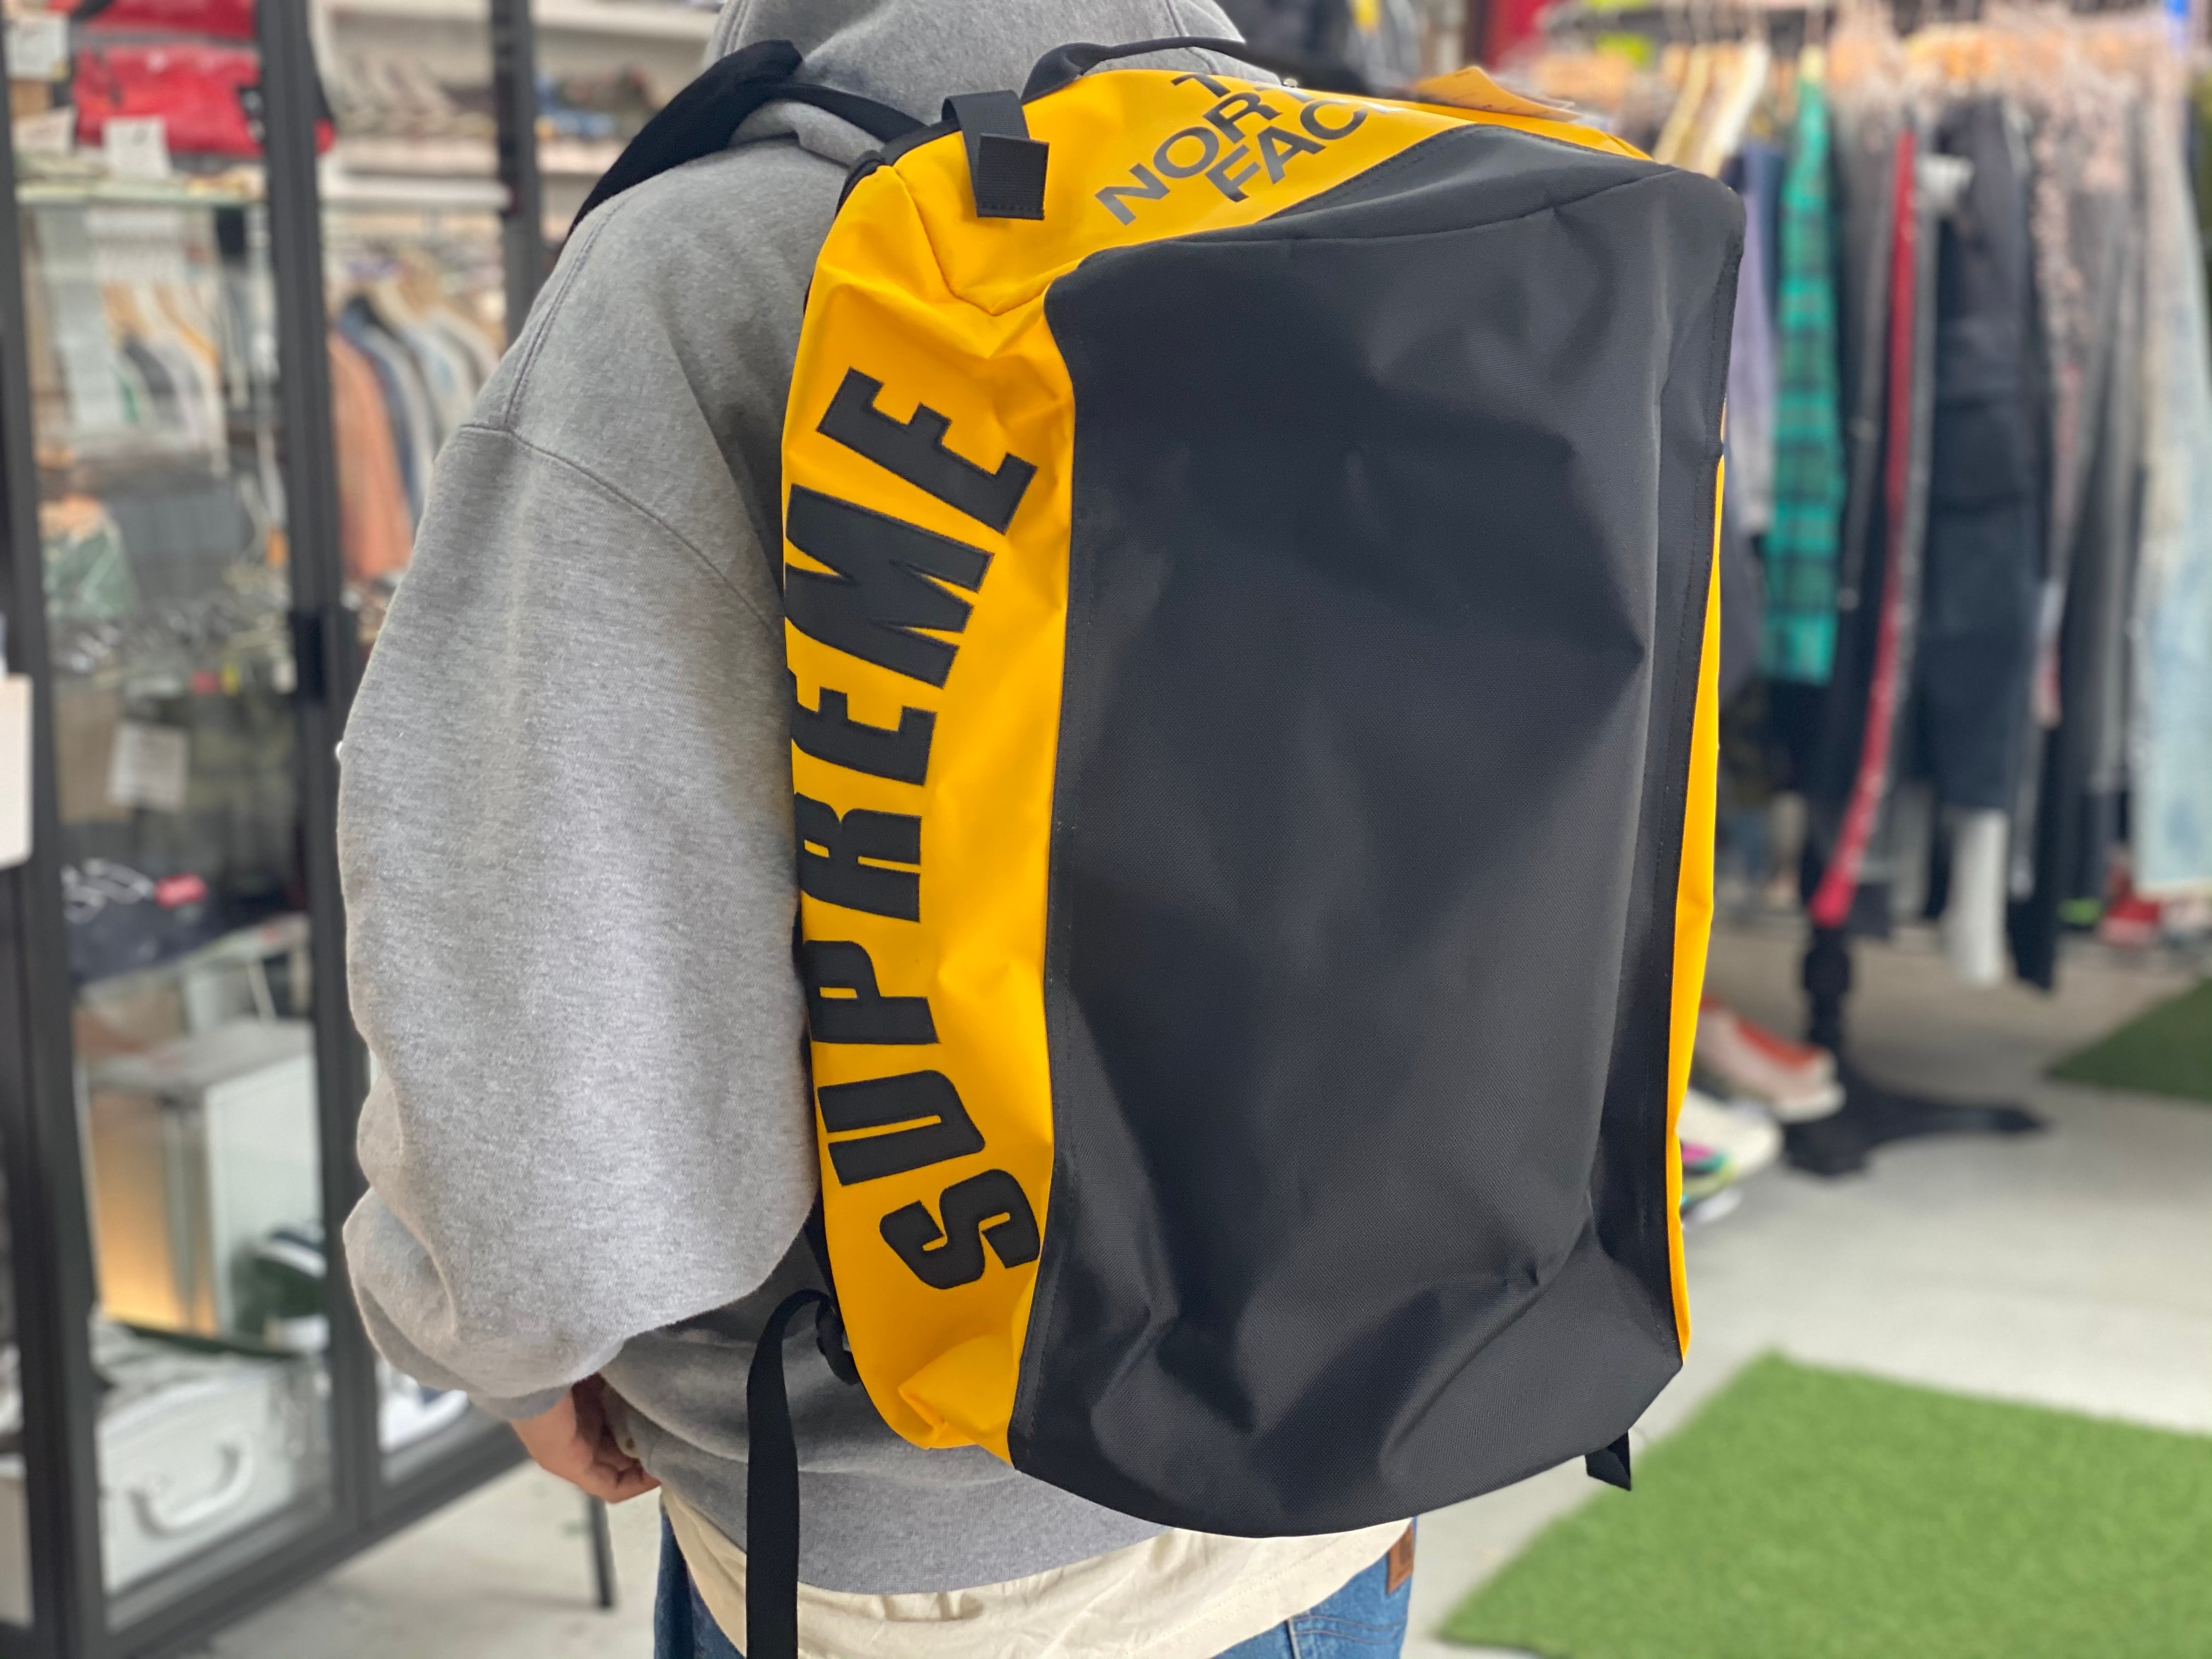 Supreme®/The North Face® Arc Logo Bag | www.innoveering.net